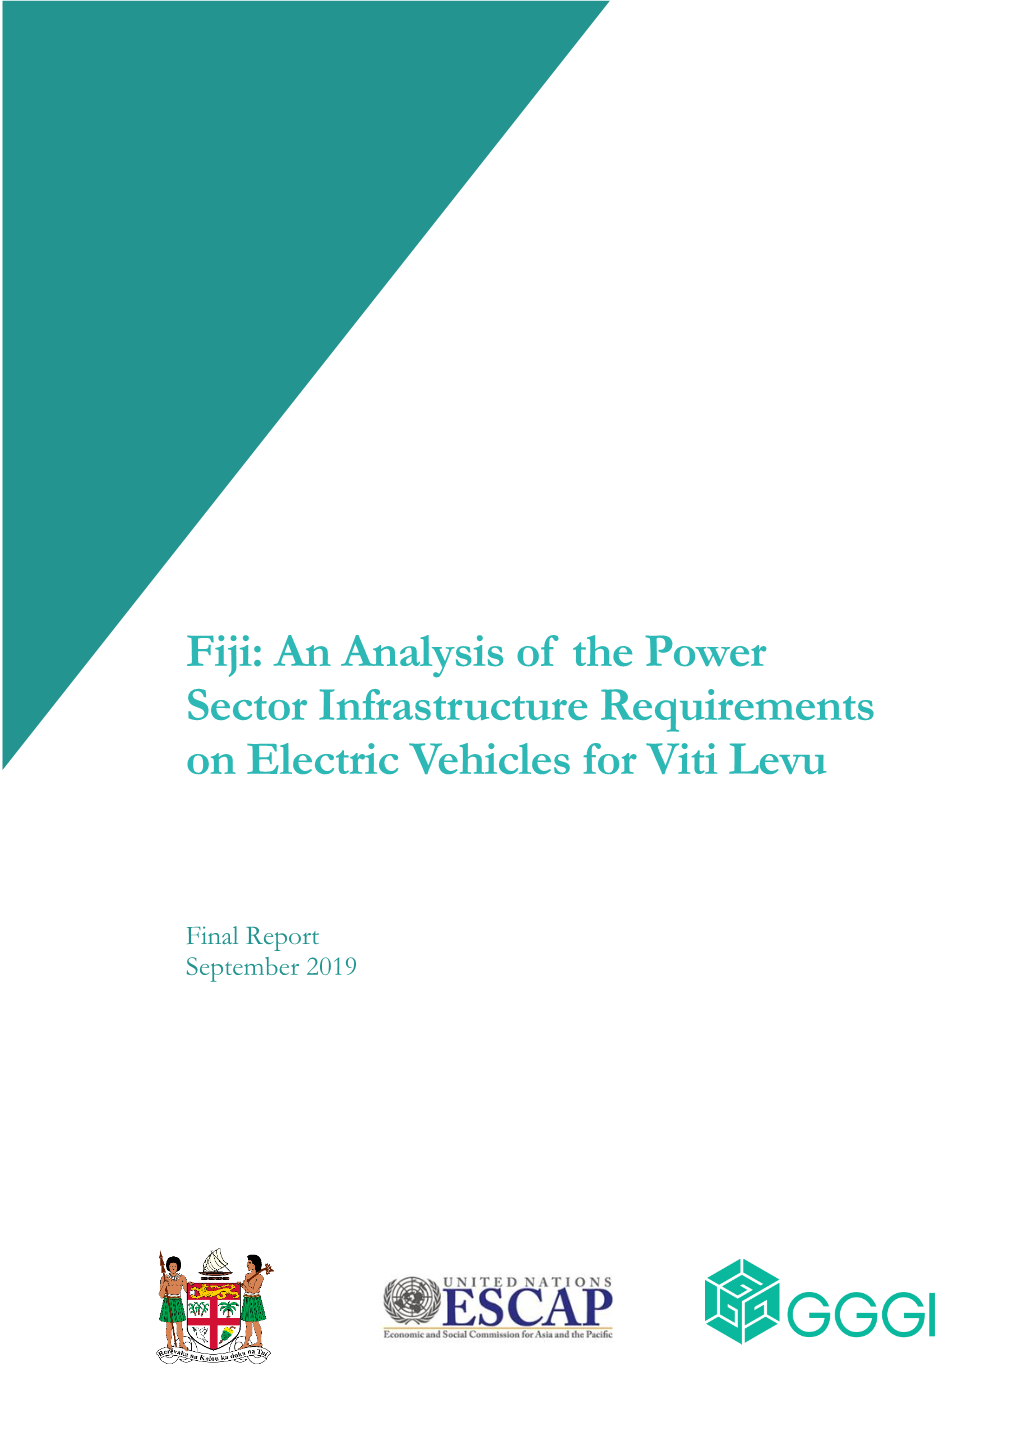 Analysis of Viti Levu Electric Vehicle Power Sector Infrastructure